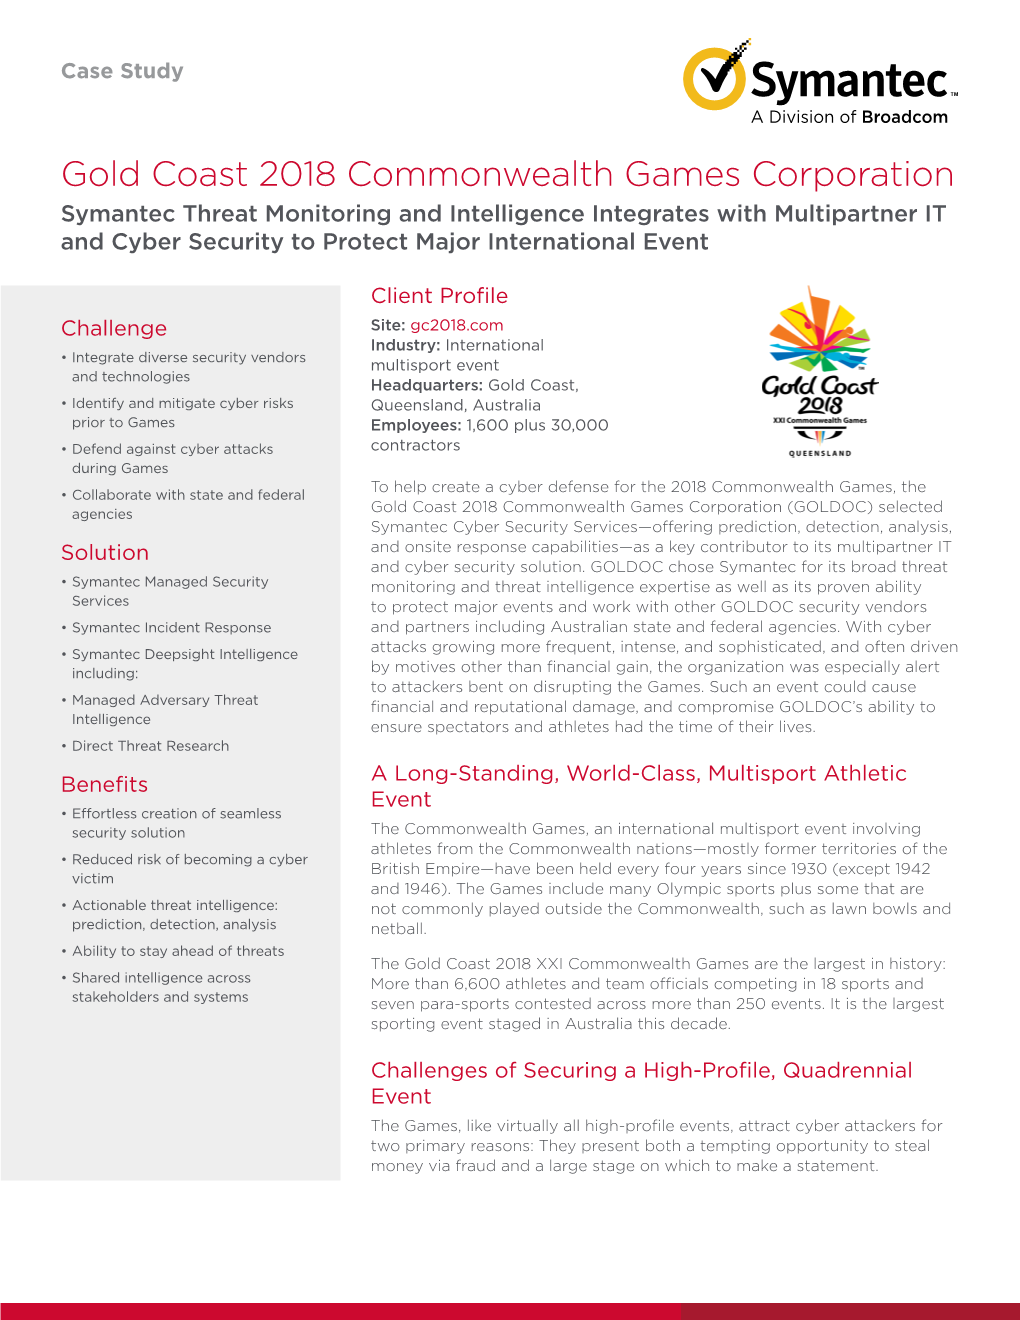 Gold Coast 2018 Commonwealth Games Corporation Case Study